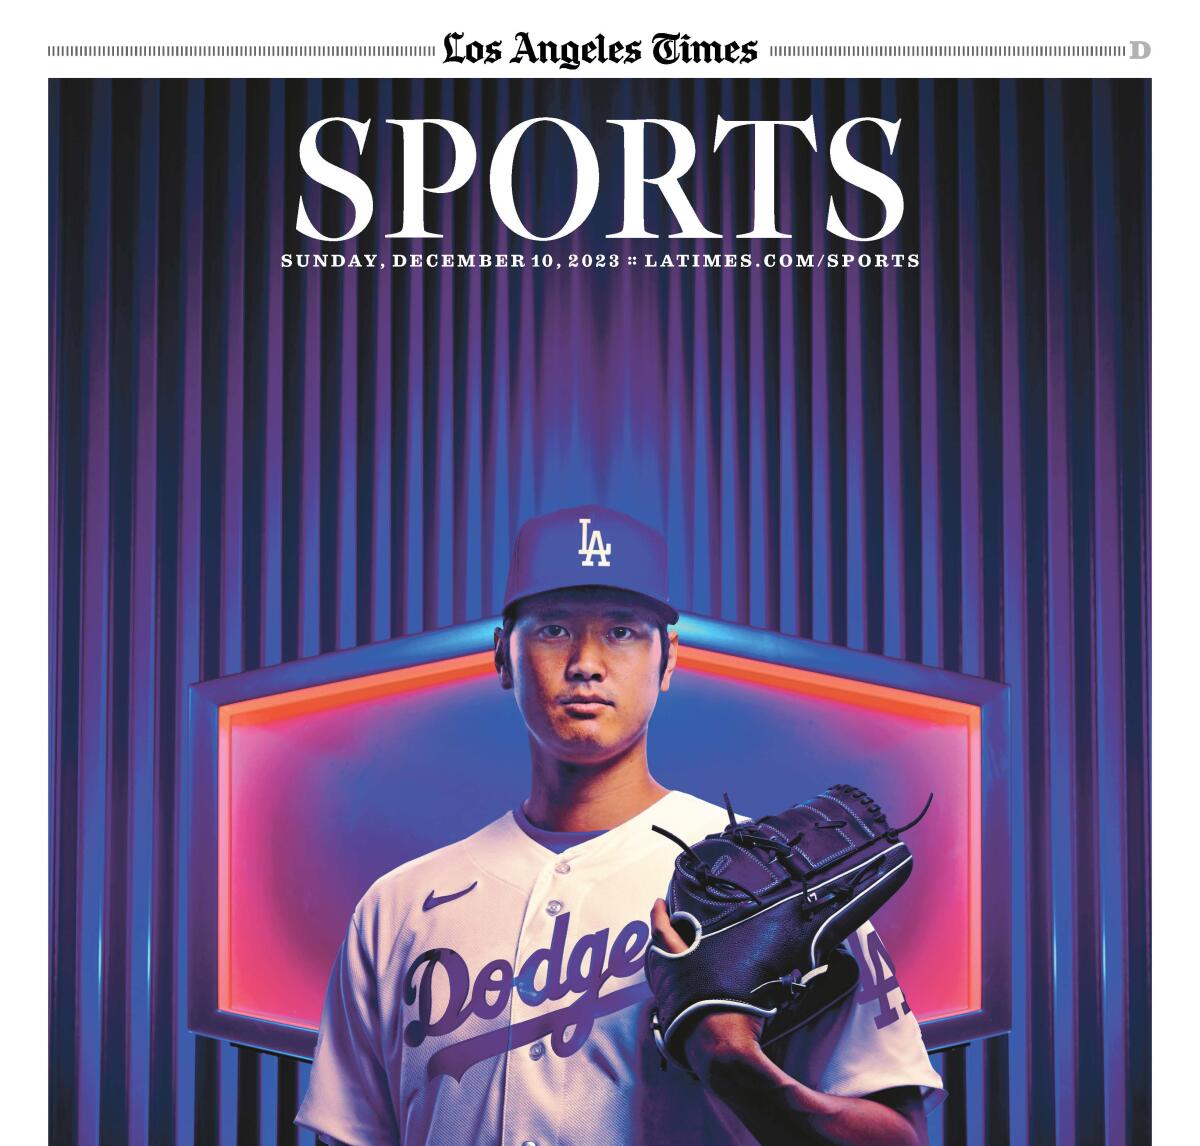 The cover of the L.A. Times sports section features an illustration of Shohei Ohtani